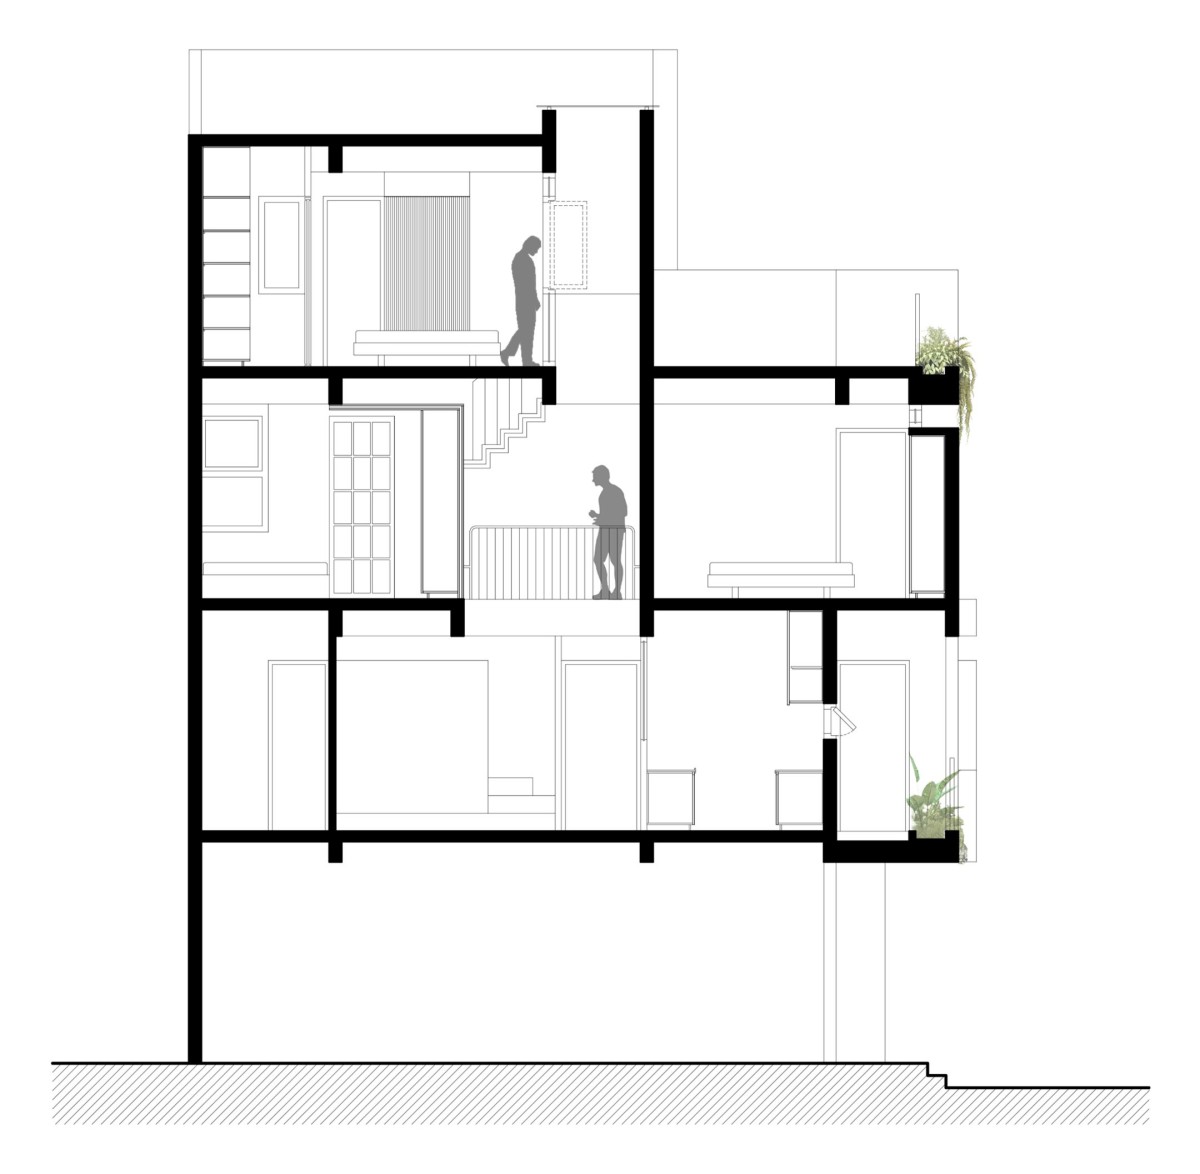 Section 1 of Compact House by Rahul Pudale Design